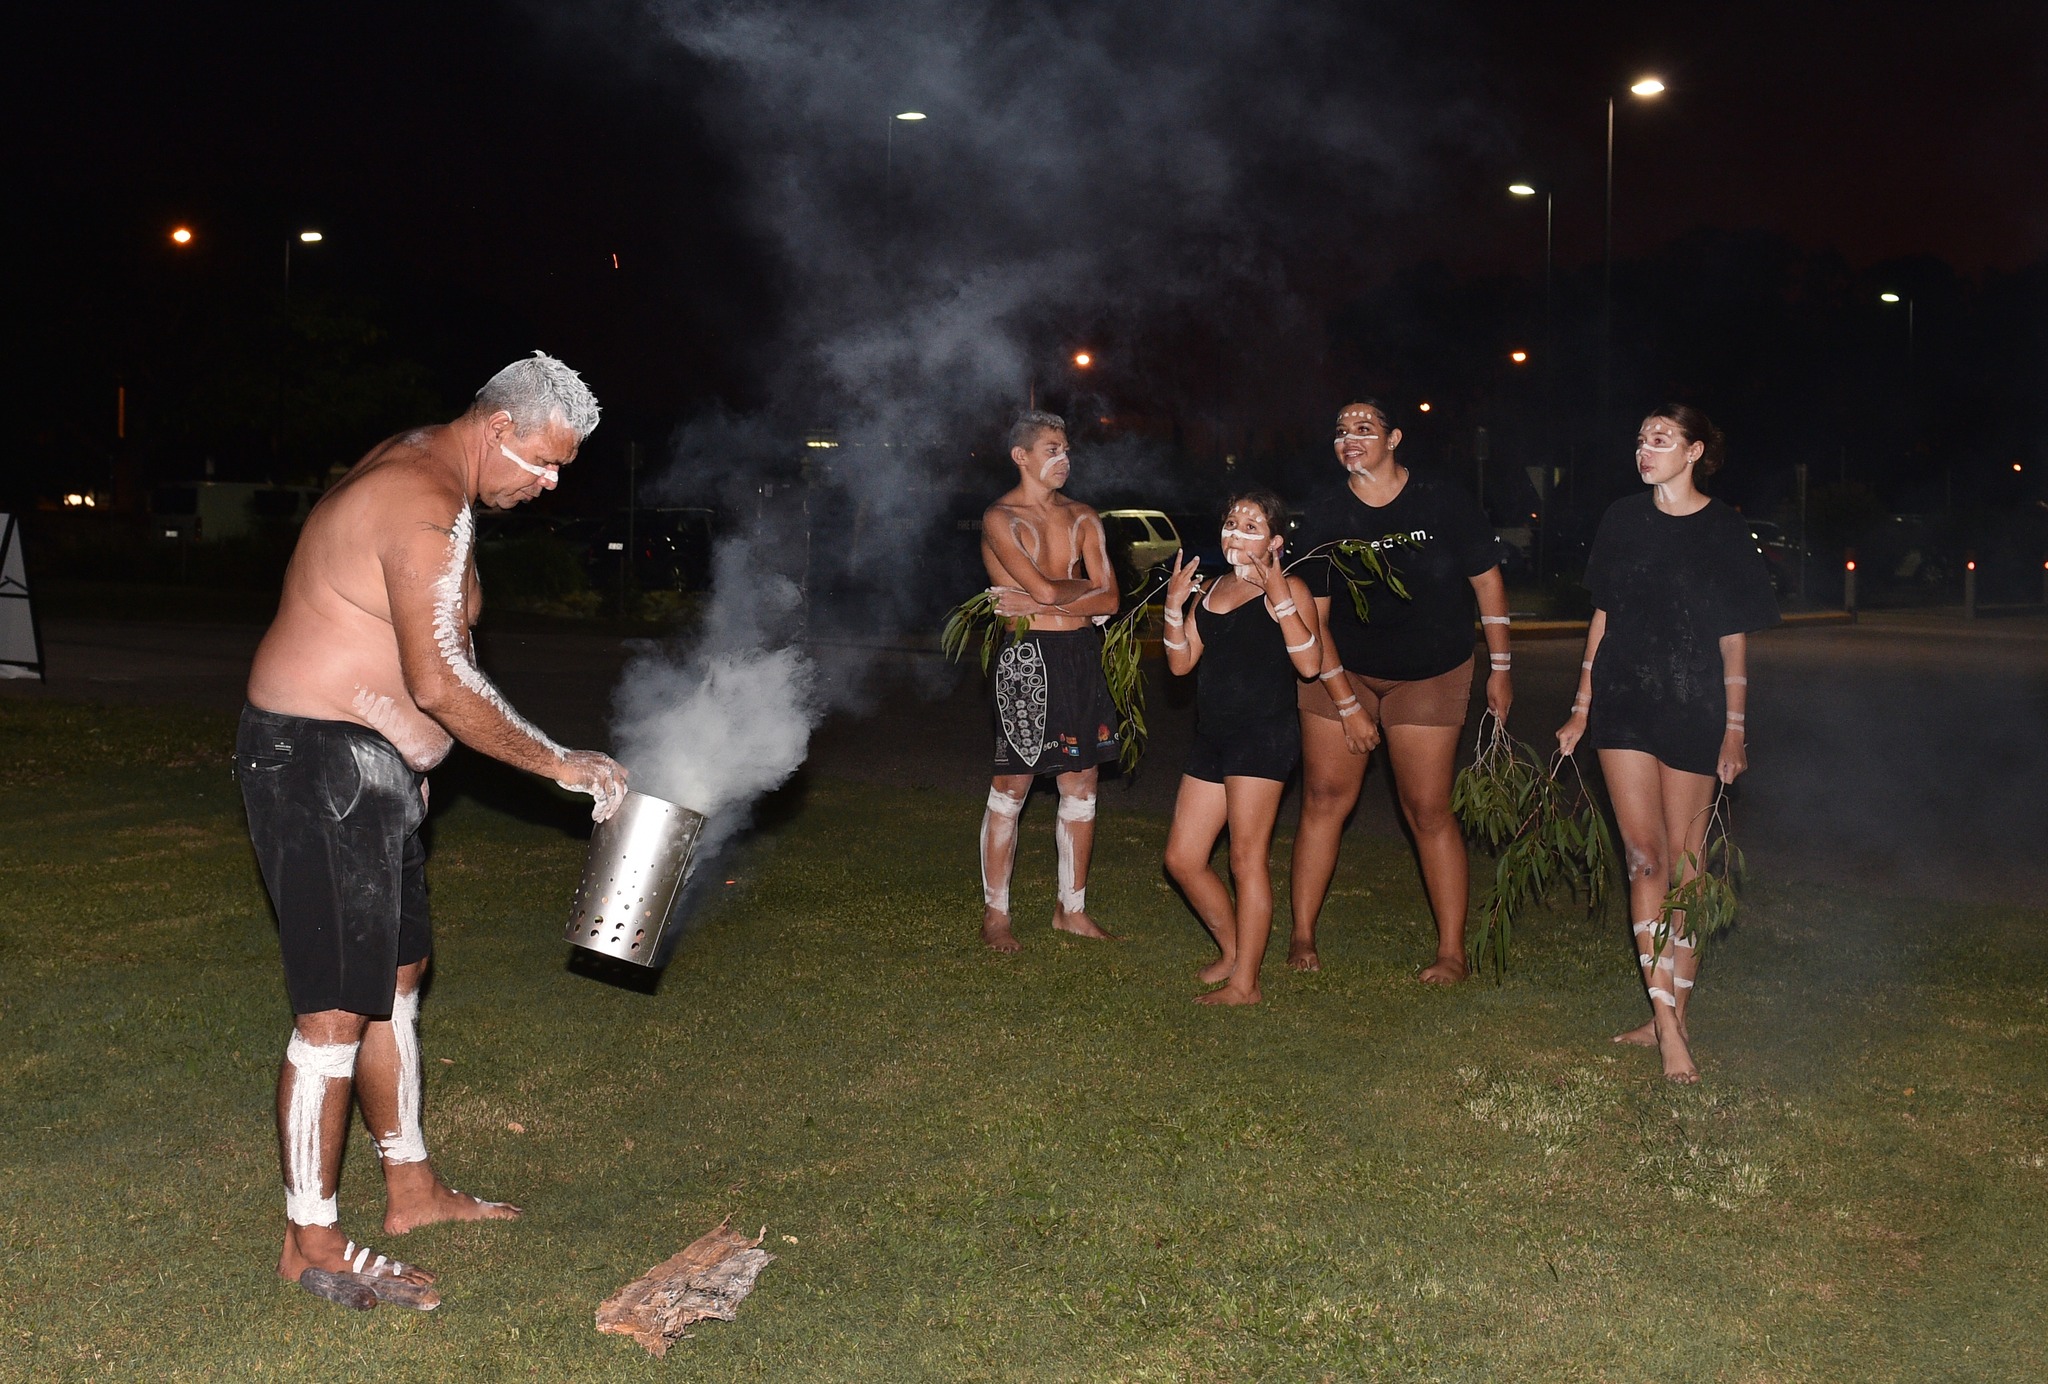 Butchulla man Narvo and members of the Owens Clan perform a smoking ceremony. Photo: Alistair Brightman